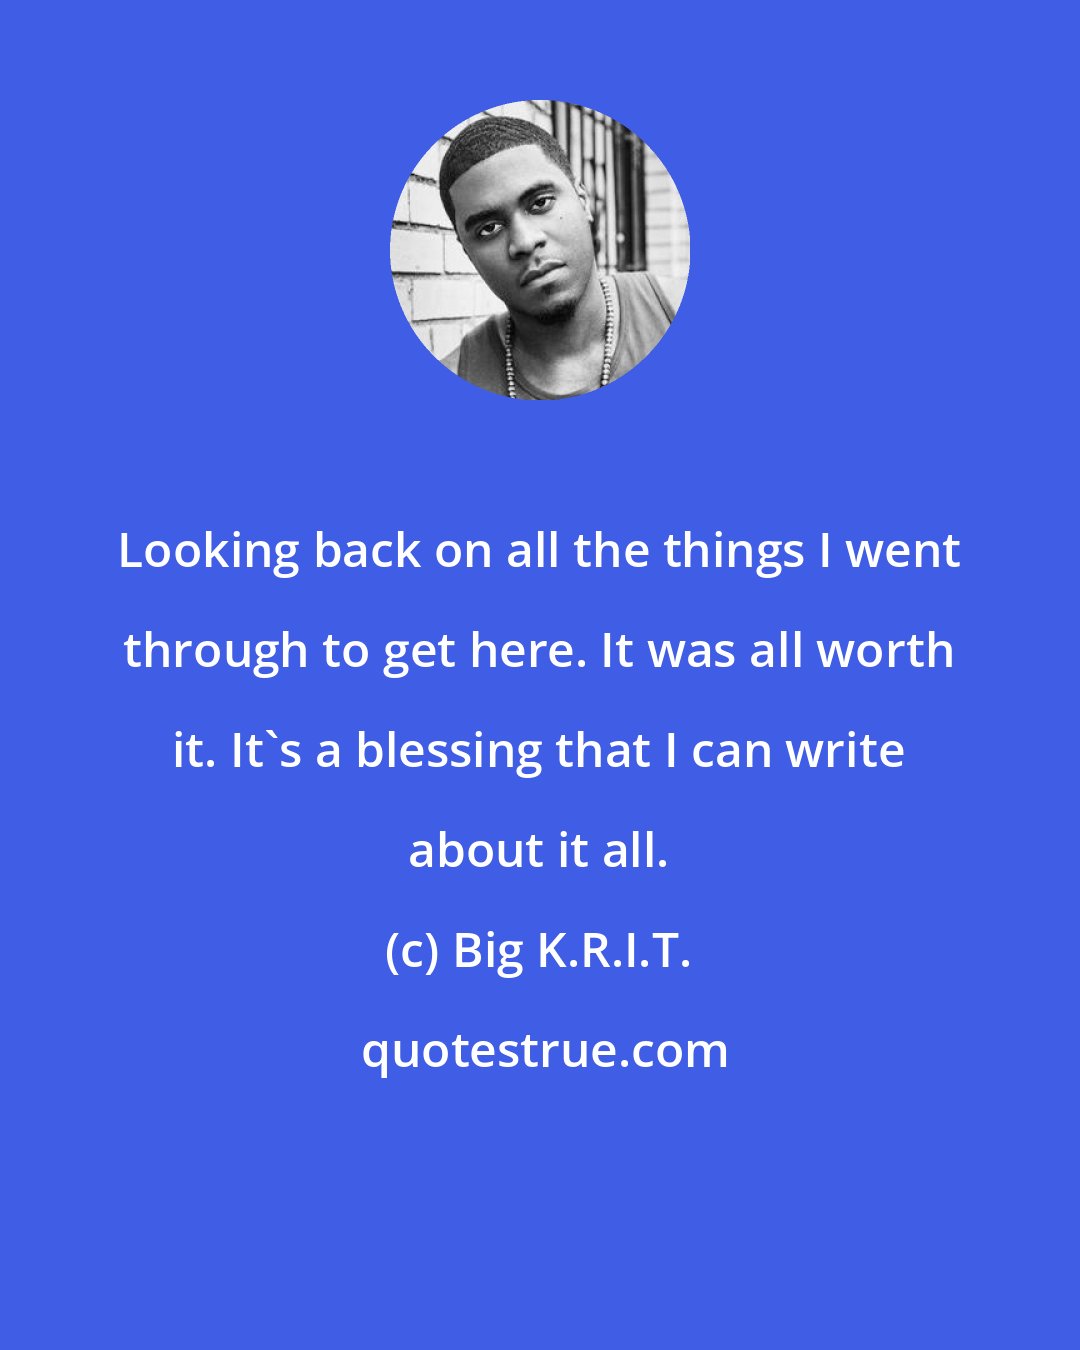 Big K.R.I.T.: Looking back on all the things I went through to get here. It was all worth it. It's a blessing that I can write about it all.